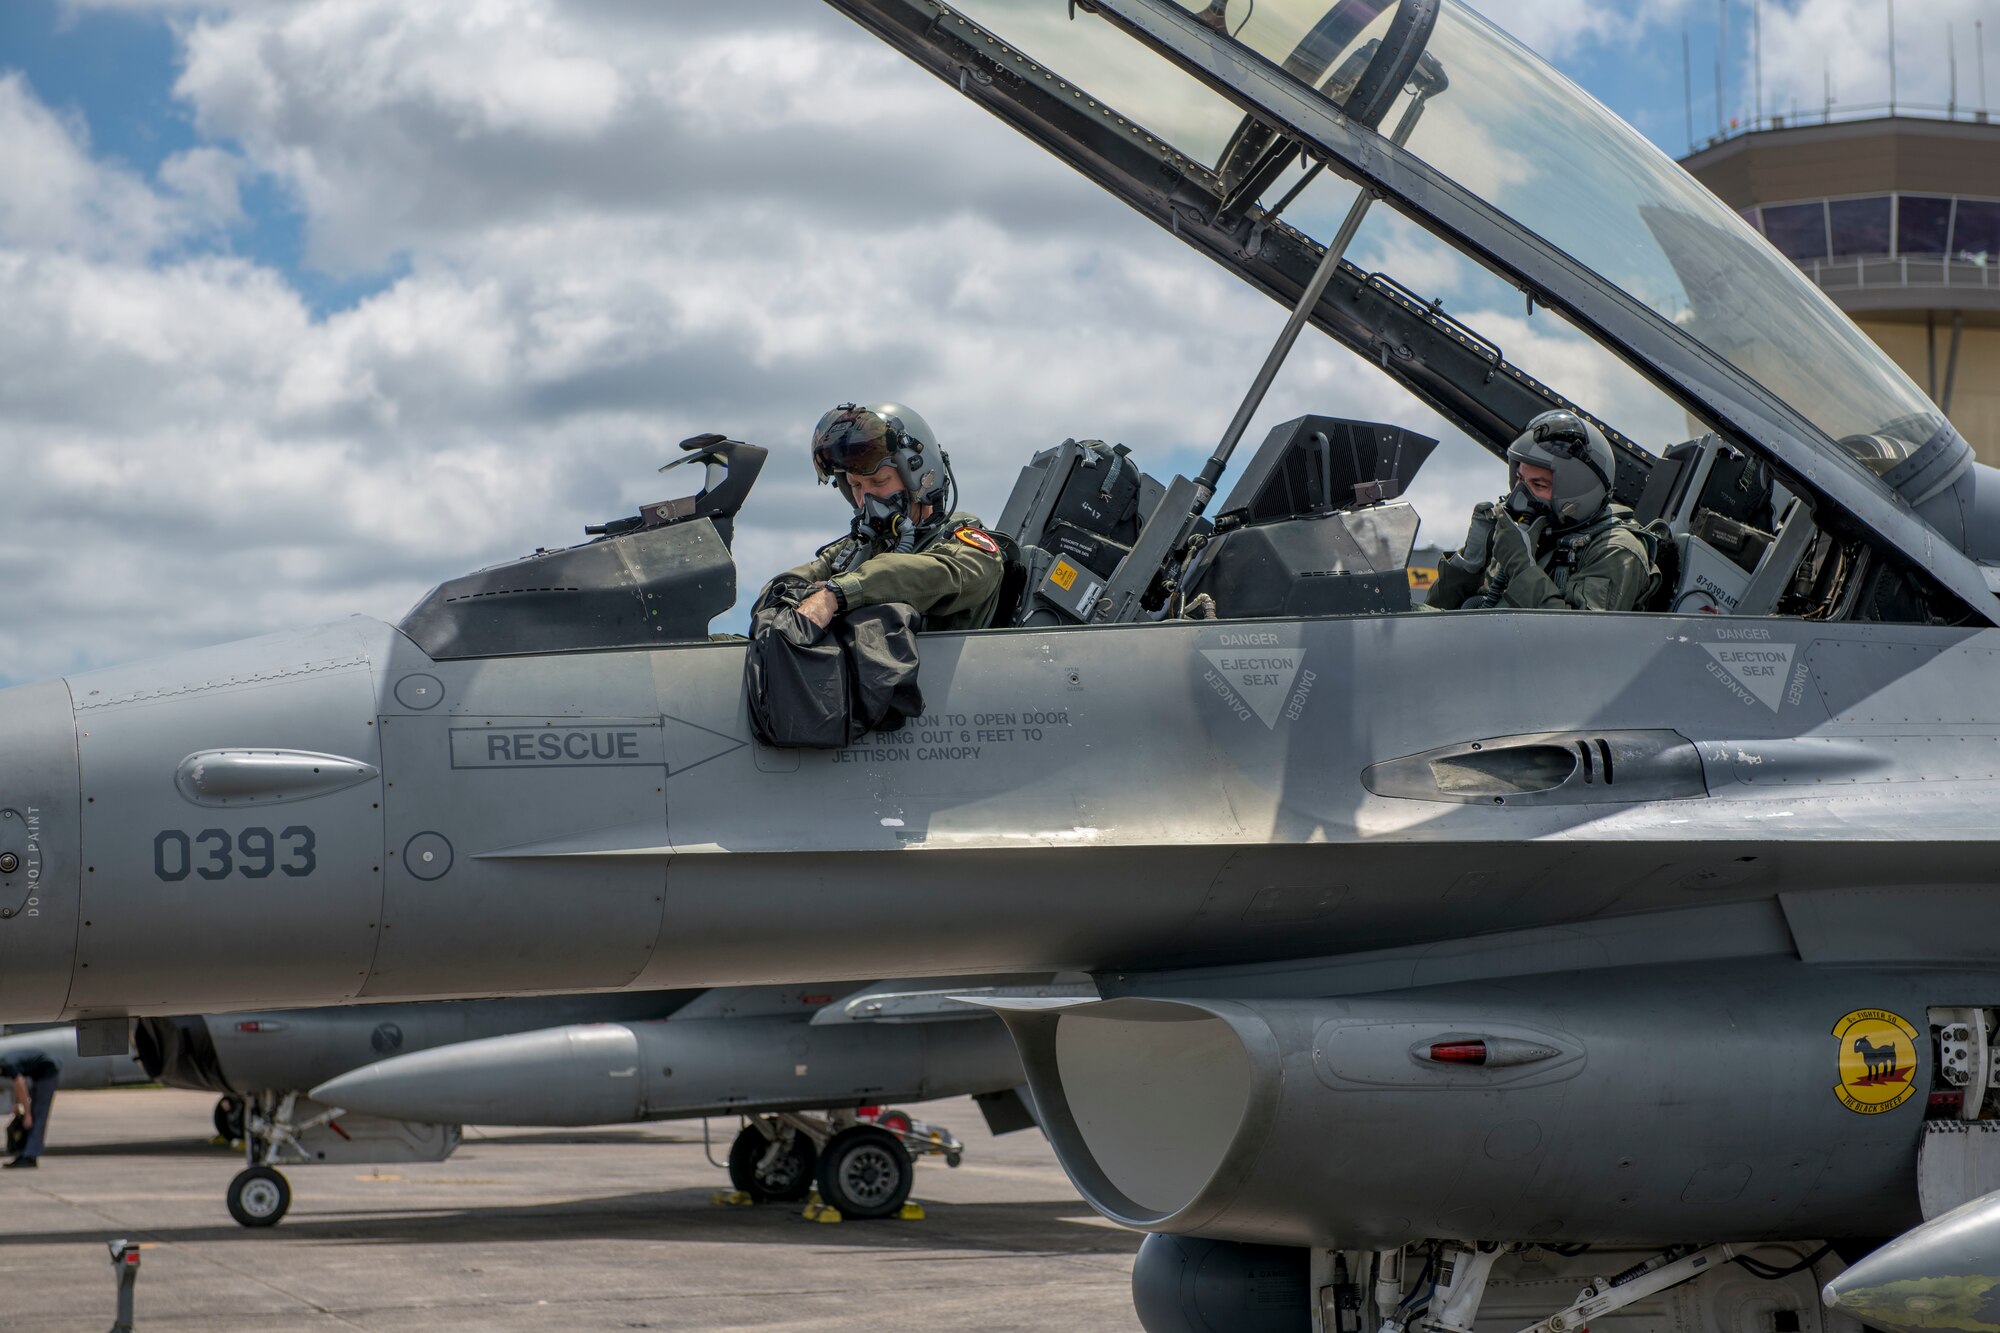 U.S. Air Force Maj. Nathaniel Lightfoot, 8th Fighter Squadron F-16 Basic-Course instructor, prepares to take Tech. Sgt. Andrew Bean, 8th FS medical element operations section chief, on a familiarization flight, April 9, 2019, on Naval Air Station Joint Reserve Base New Orleans, La. During the temporary duty assignment, many personnel were given the opportunity to go on a FAM flight in the back of an F-16 D-model. (U.S. Air Force photo by Airman 1st Class Kindra Stewart)